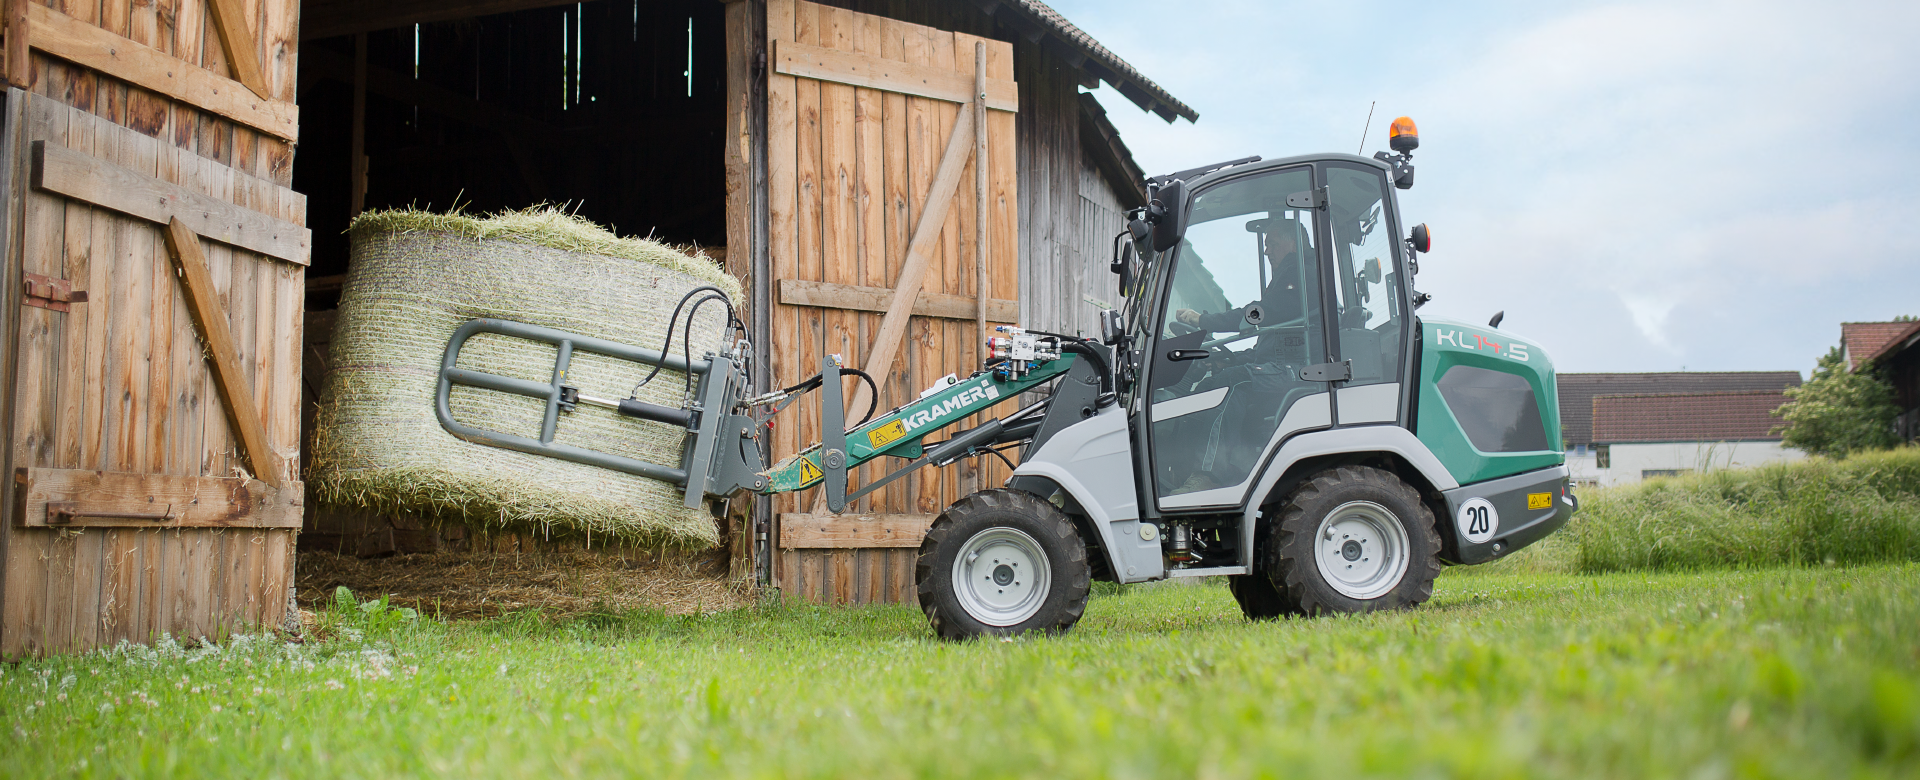 The compact KL14.5 while loading a straw bale through a stable gate.